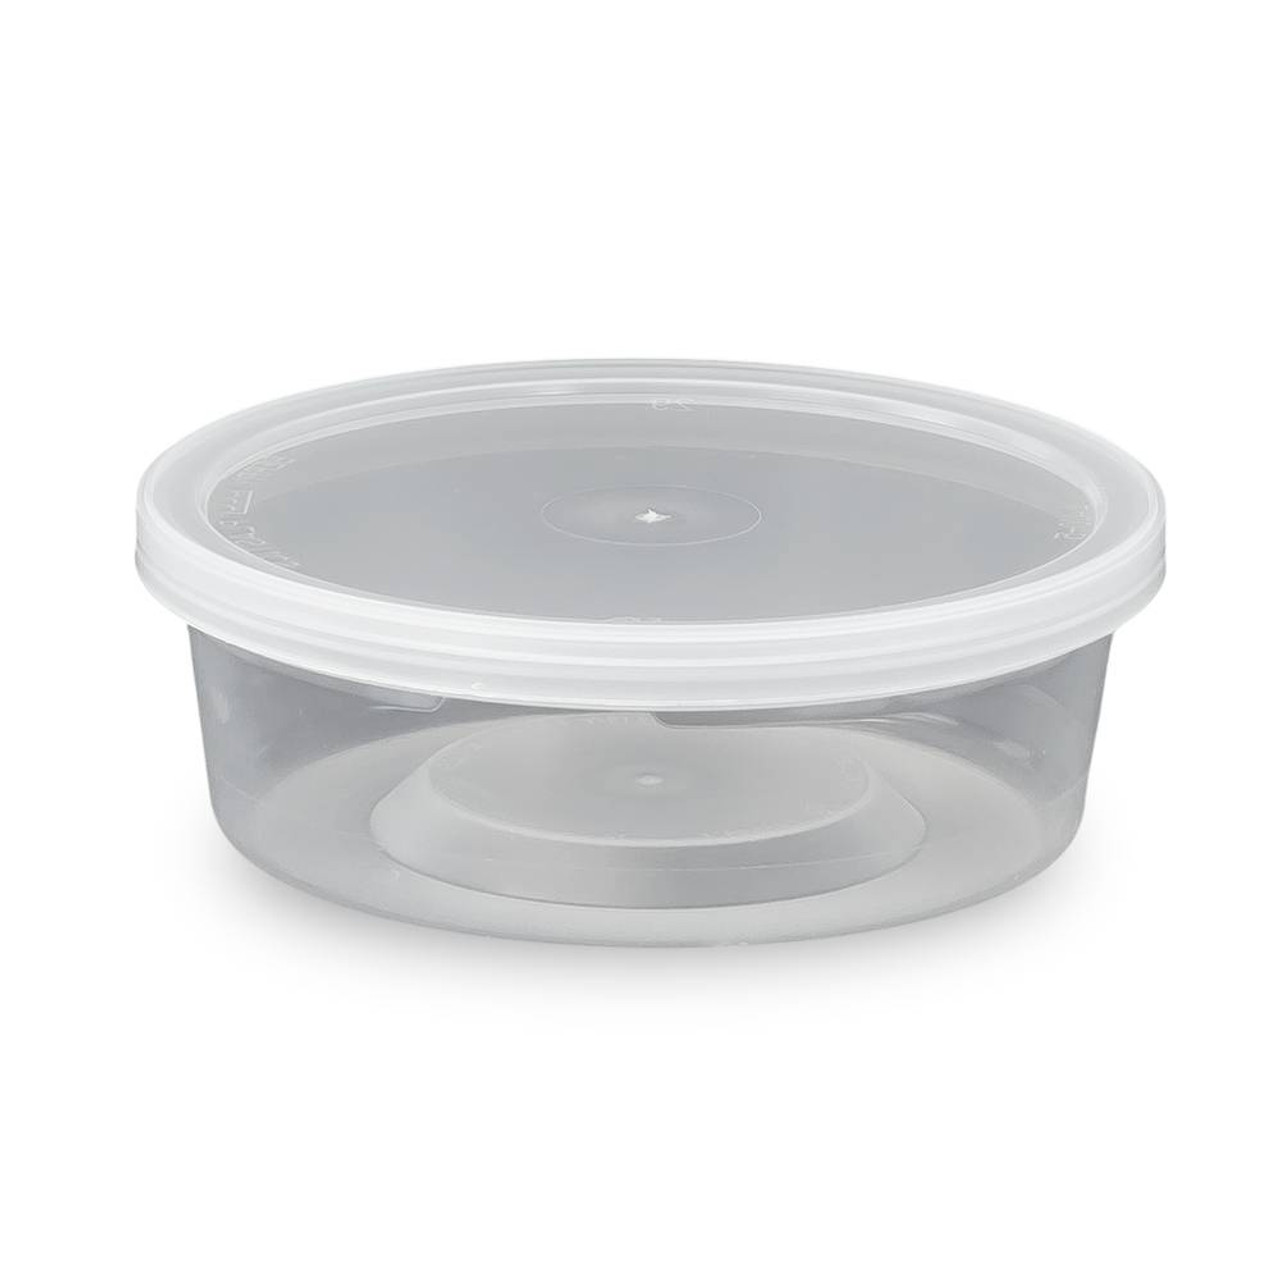 7 oz. BPA Free Food Grade Round Container (T41007CP) - 1000 count